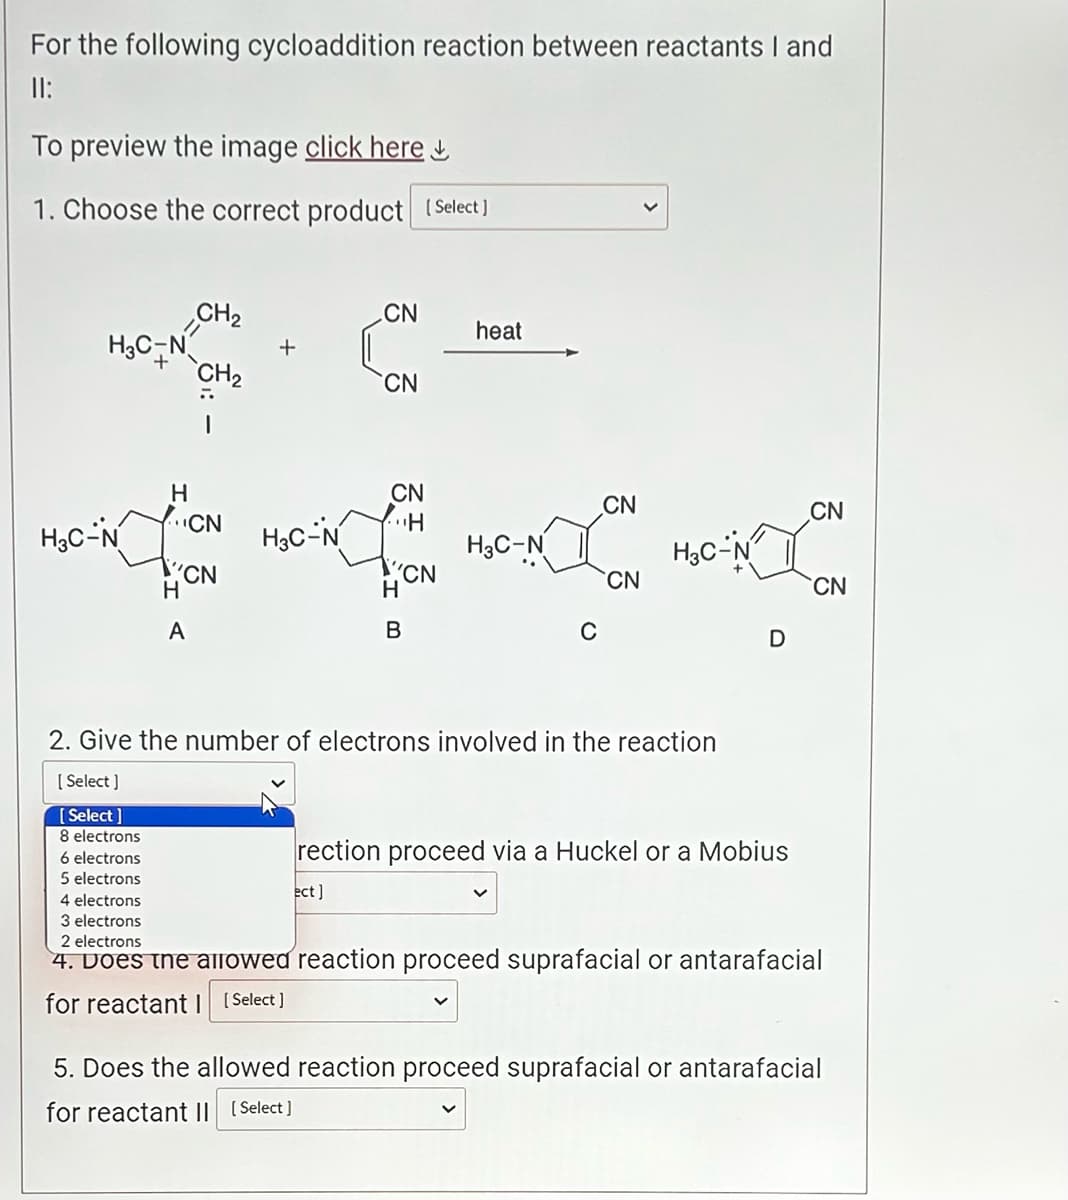 For the following cycloaddition reaction between reactants I and
11:
To preview the image click here
1. Choose the correct product [Select]
H3C-N
H3C-N
H
CN
H
CH₂
CH₂
CN
A
H3C-N
CN
CN
ect]
CN
H
H
CN
B
heat
H3C-N
C
CN
CN
H3C-N
2. Give the number of electrons involved in the reaction
[Select]
[Select]
8 electrons
6 electrons
5 electrons
D
rection proceed via a Huckel or a Mobius
CN
CN
4 electrons
3 electrons
2 electrons
4. Does the allowed reaction proceed suprafacial or antarafacial
for reactant 1 [Select]
5. Does the allowed reaction proceed suprafacial or antarafacial
for reactant II [Select]